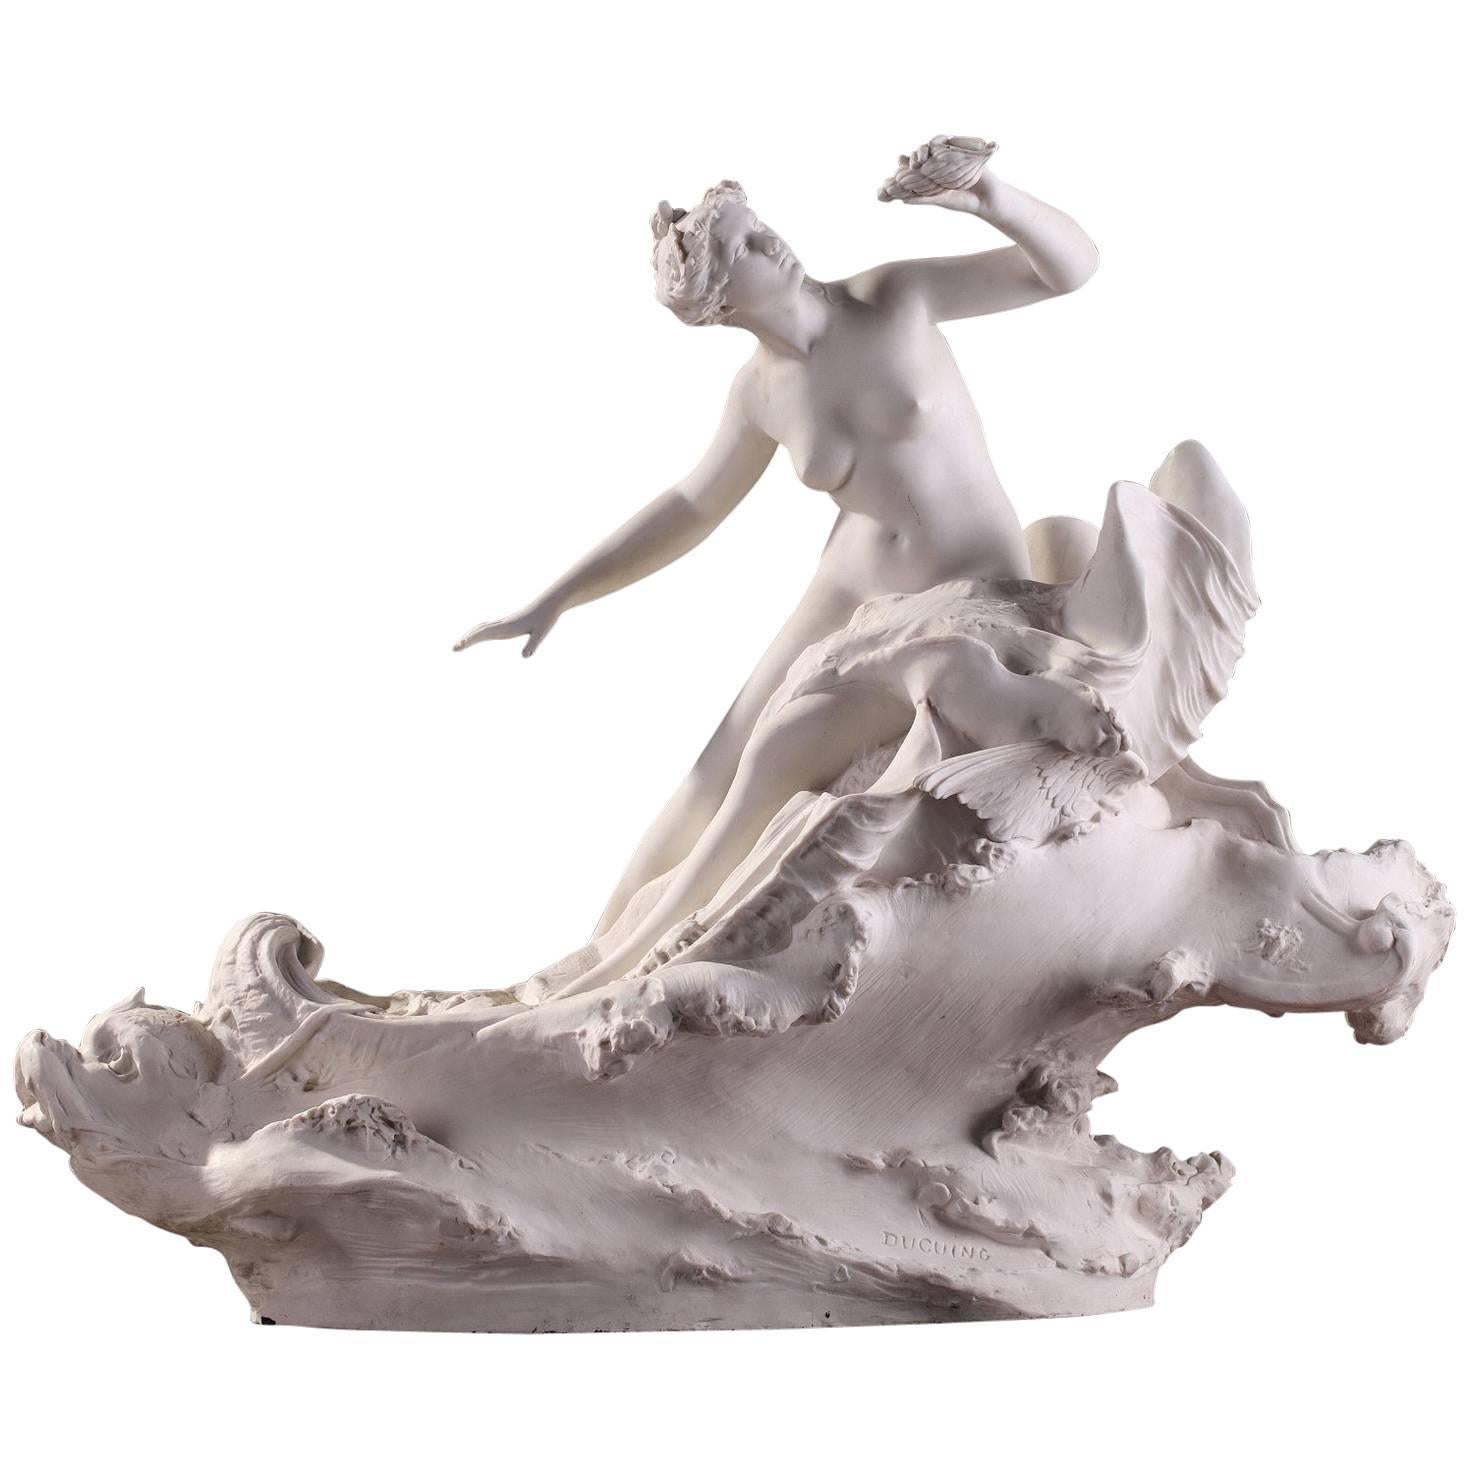 Early 20th Century Sevres Bisque Sculpture Venus Riding a Triton by Paul Ducuing